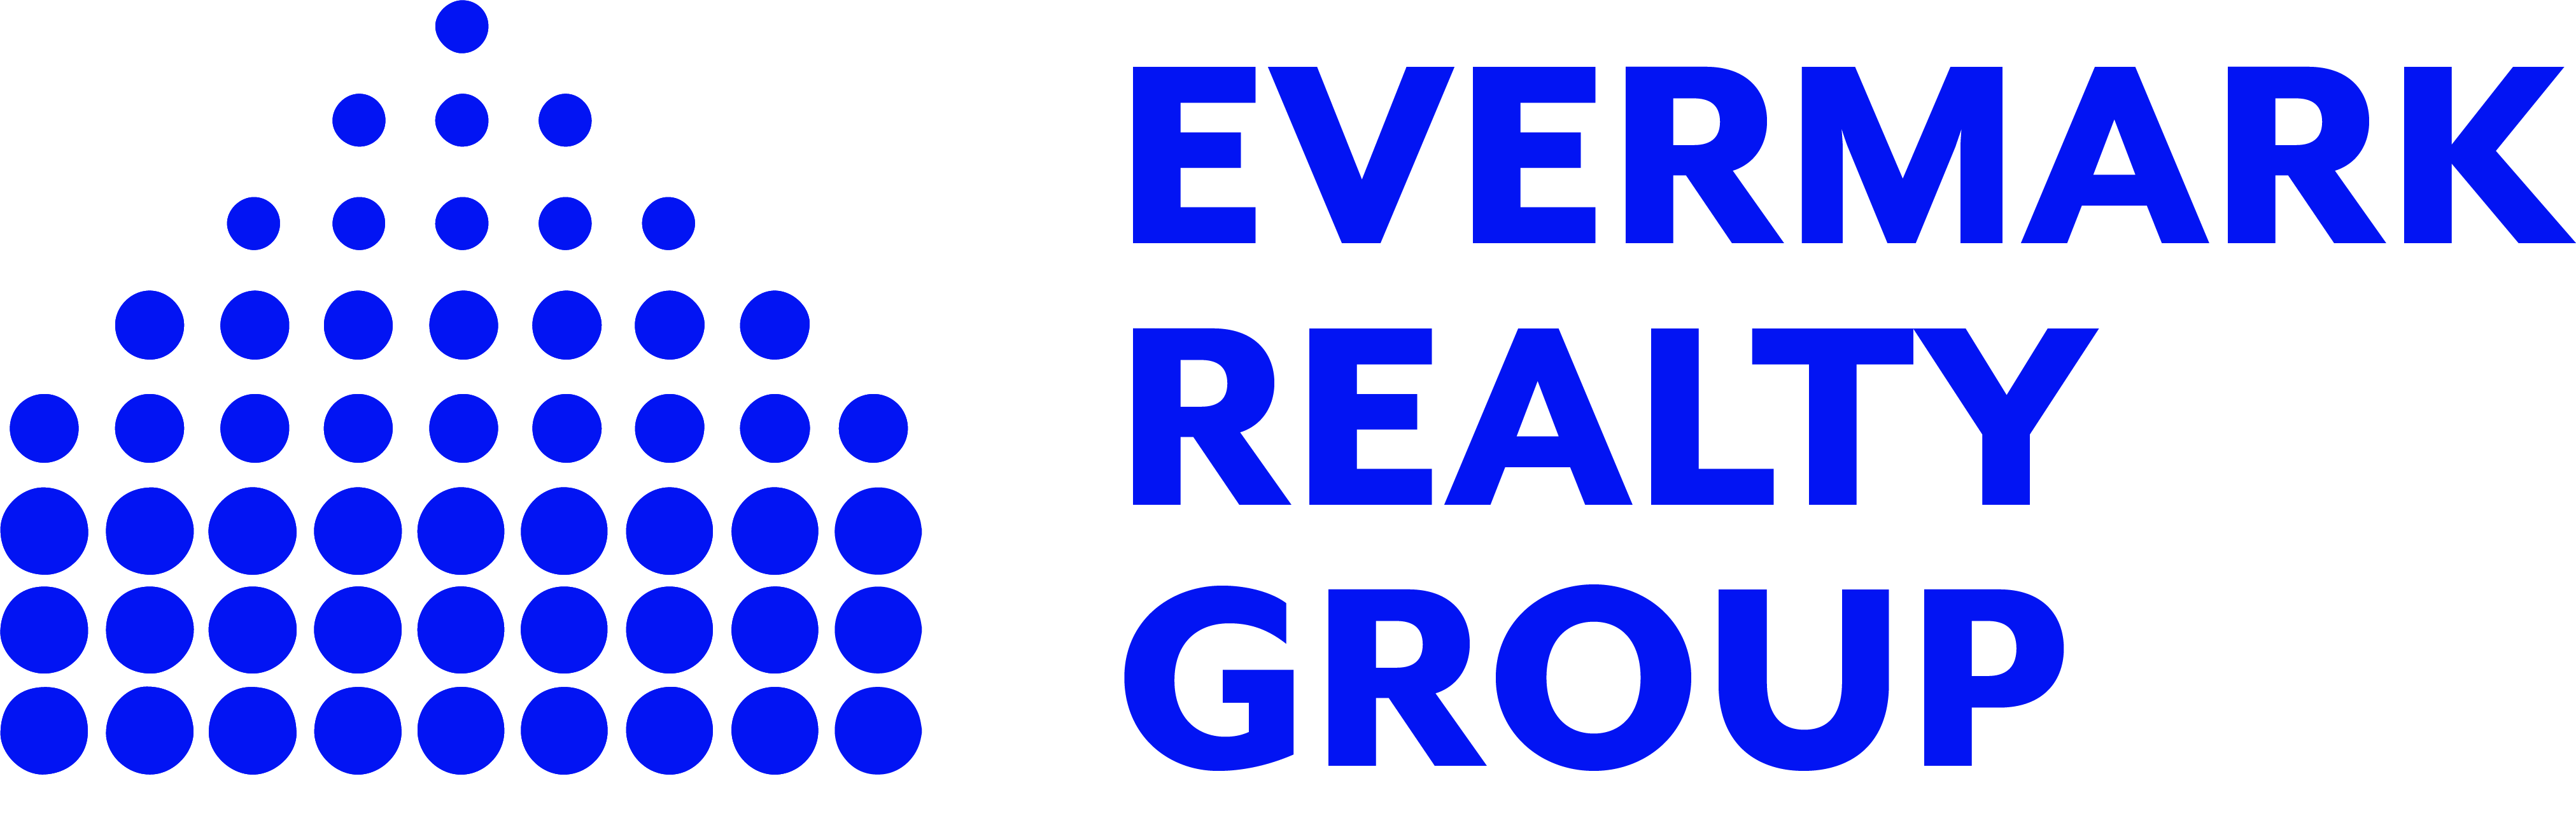 Evermark Realty Group